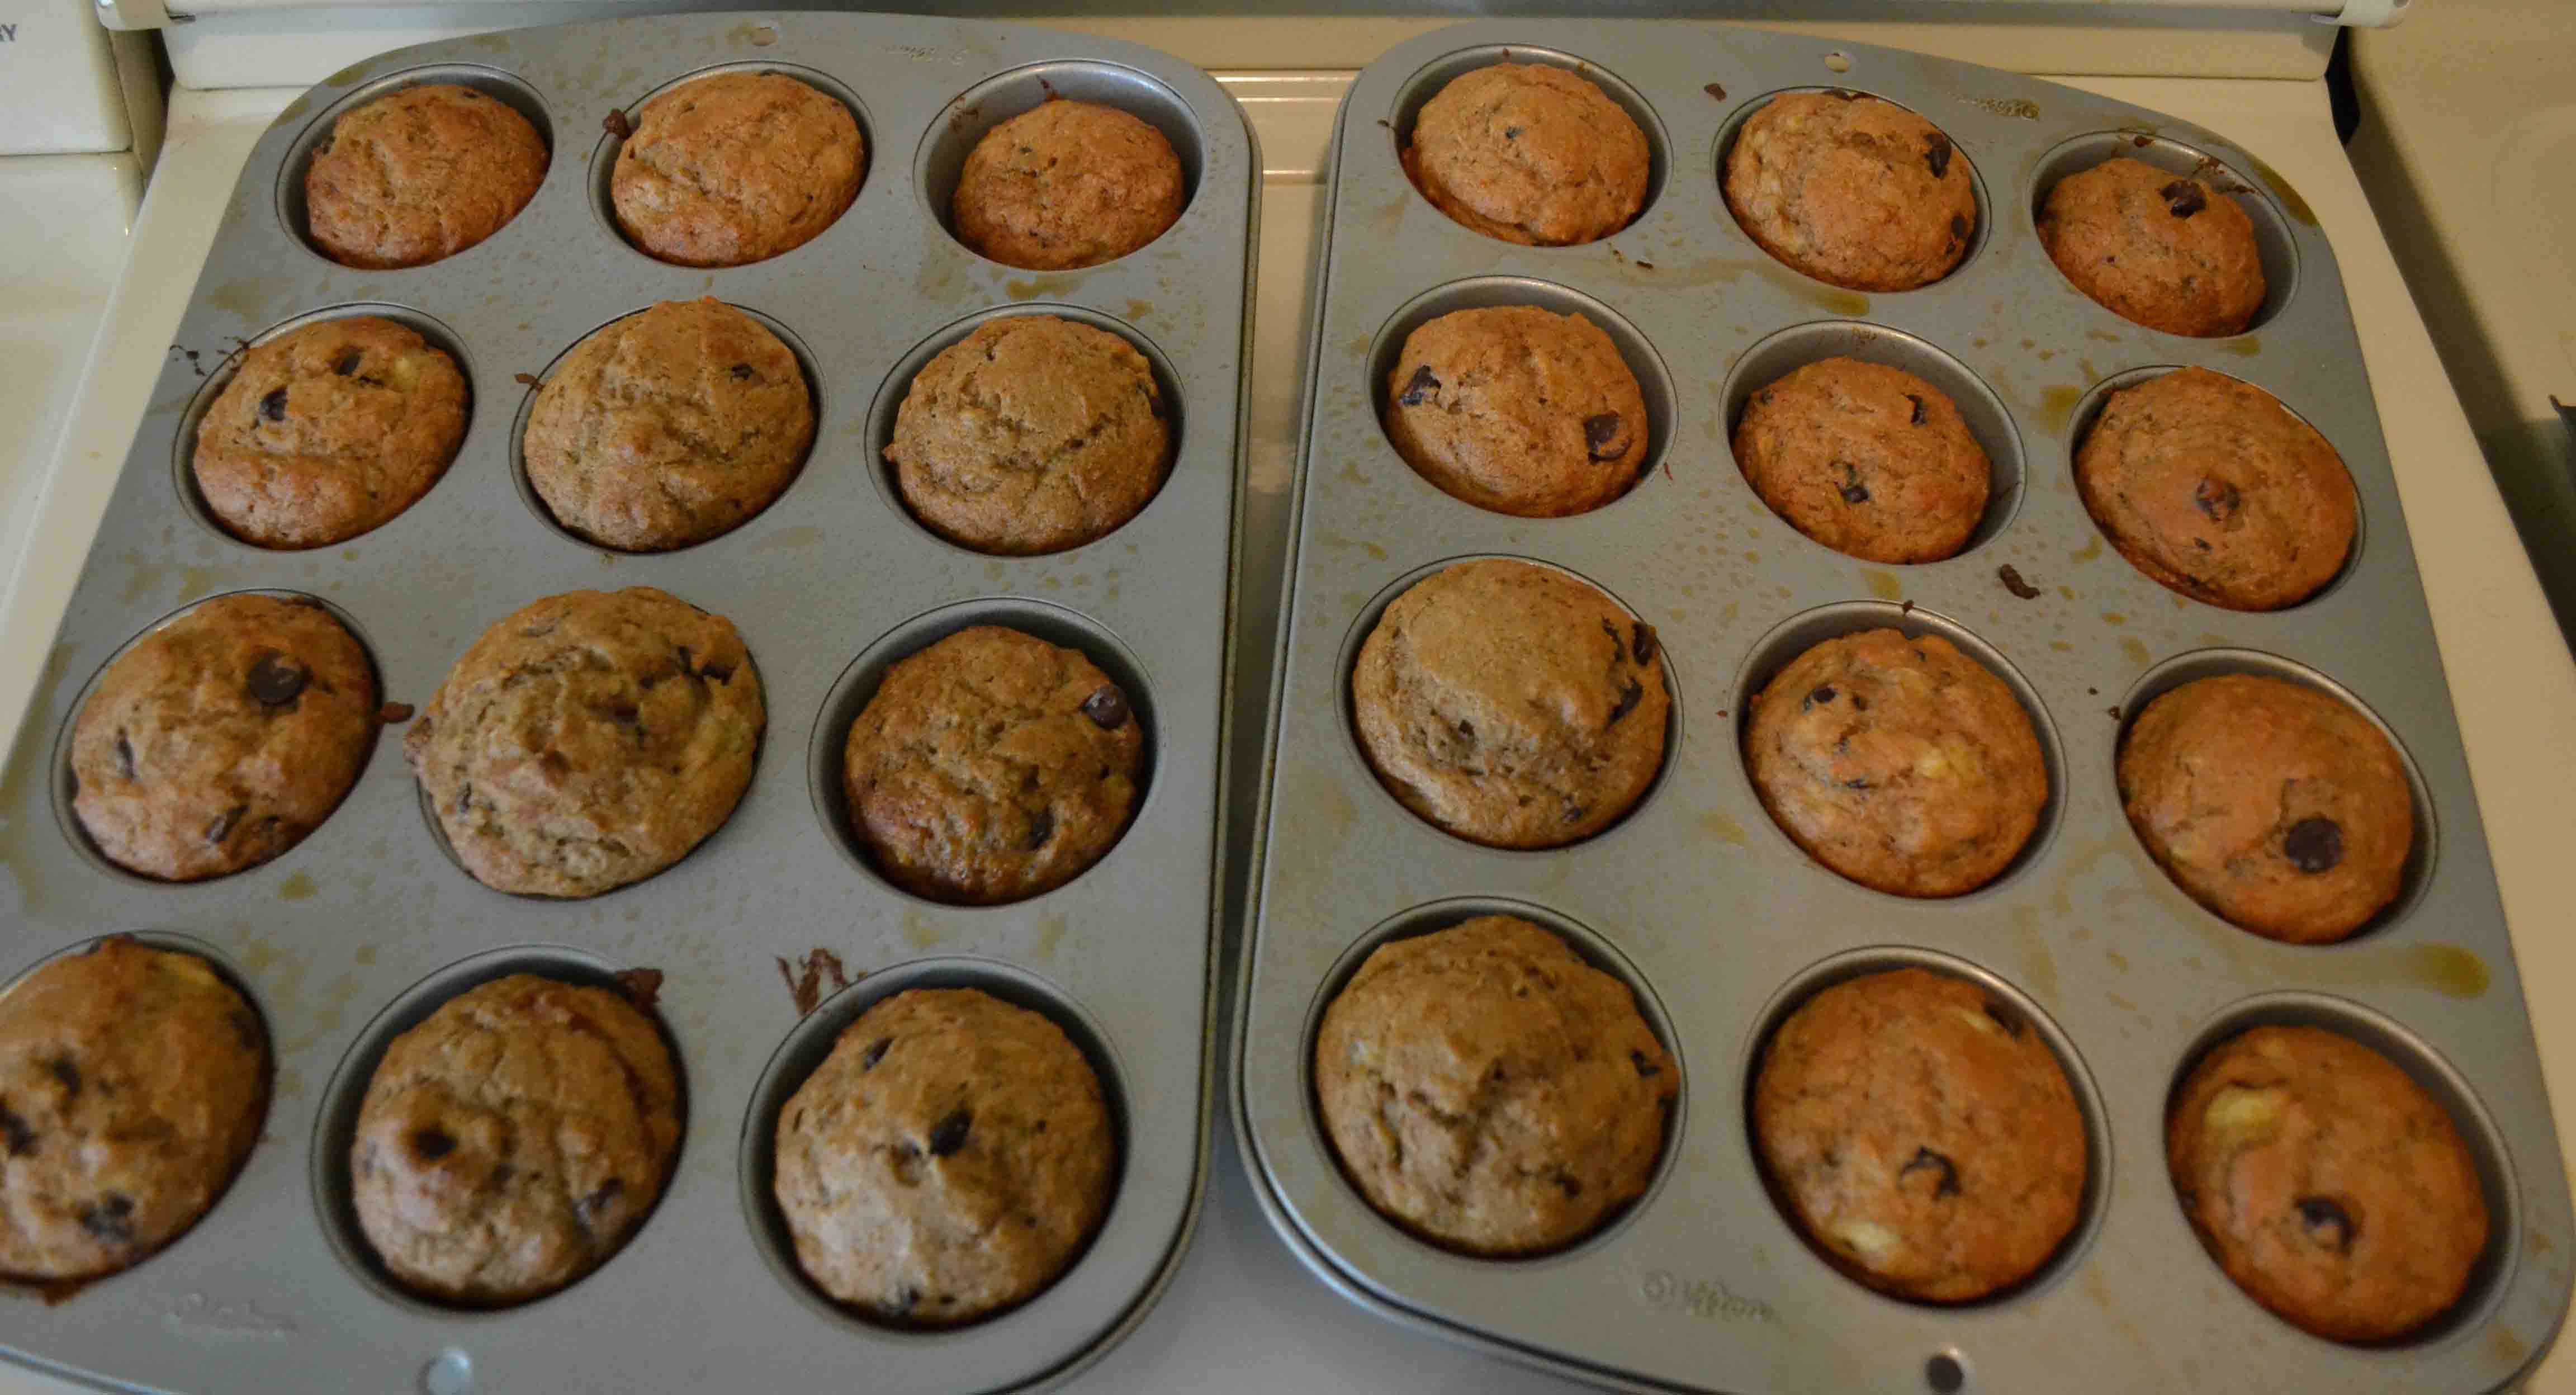 Chocolate chip banana muffins taste great and make for a delicious breakfast on the go!